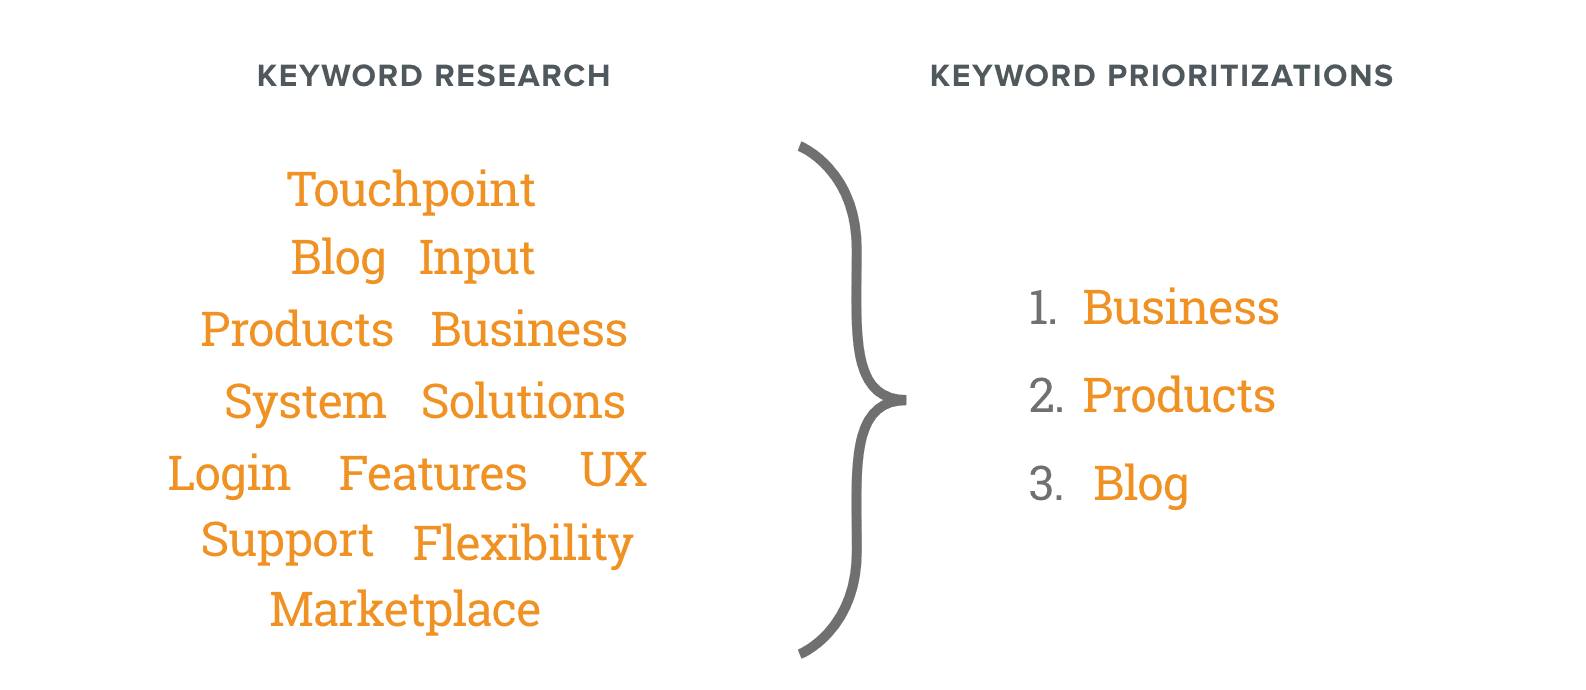 Value Keywords Over Complexity in B2B Website Content